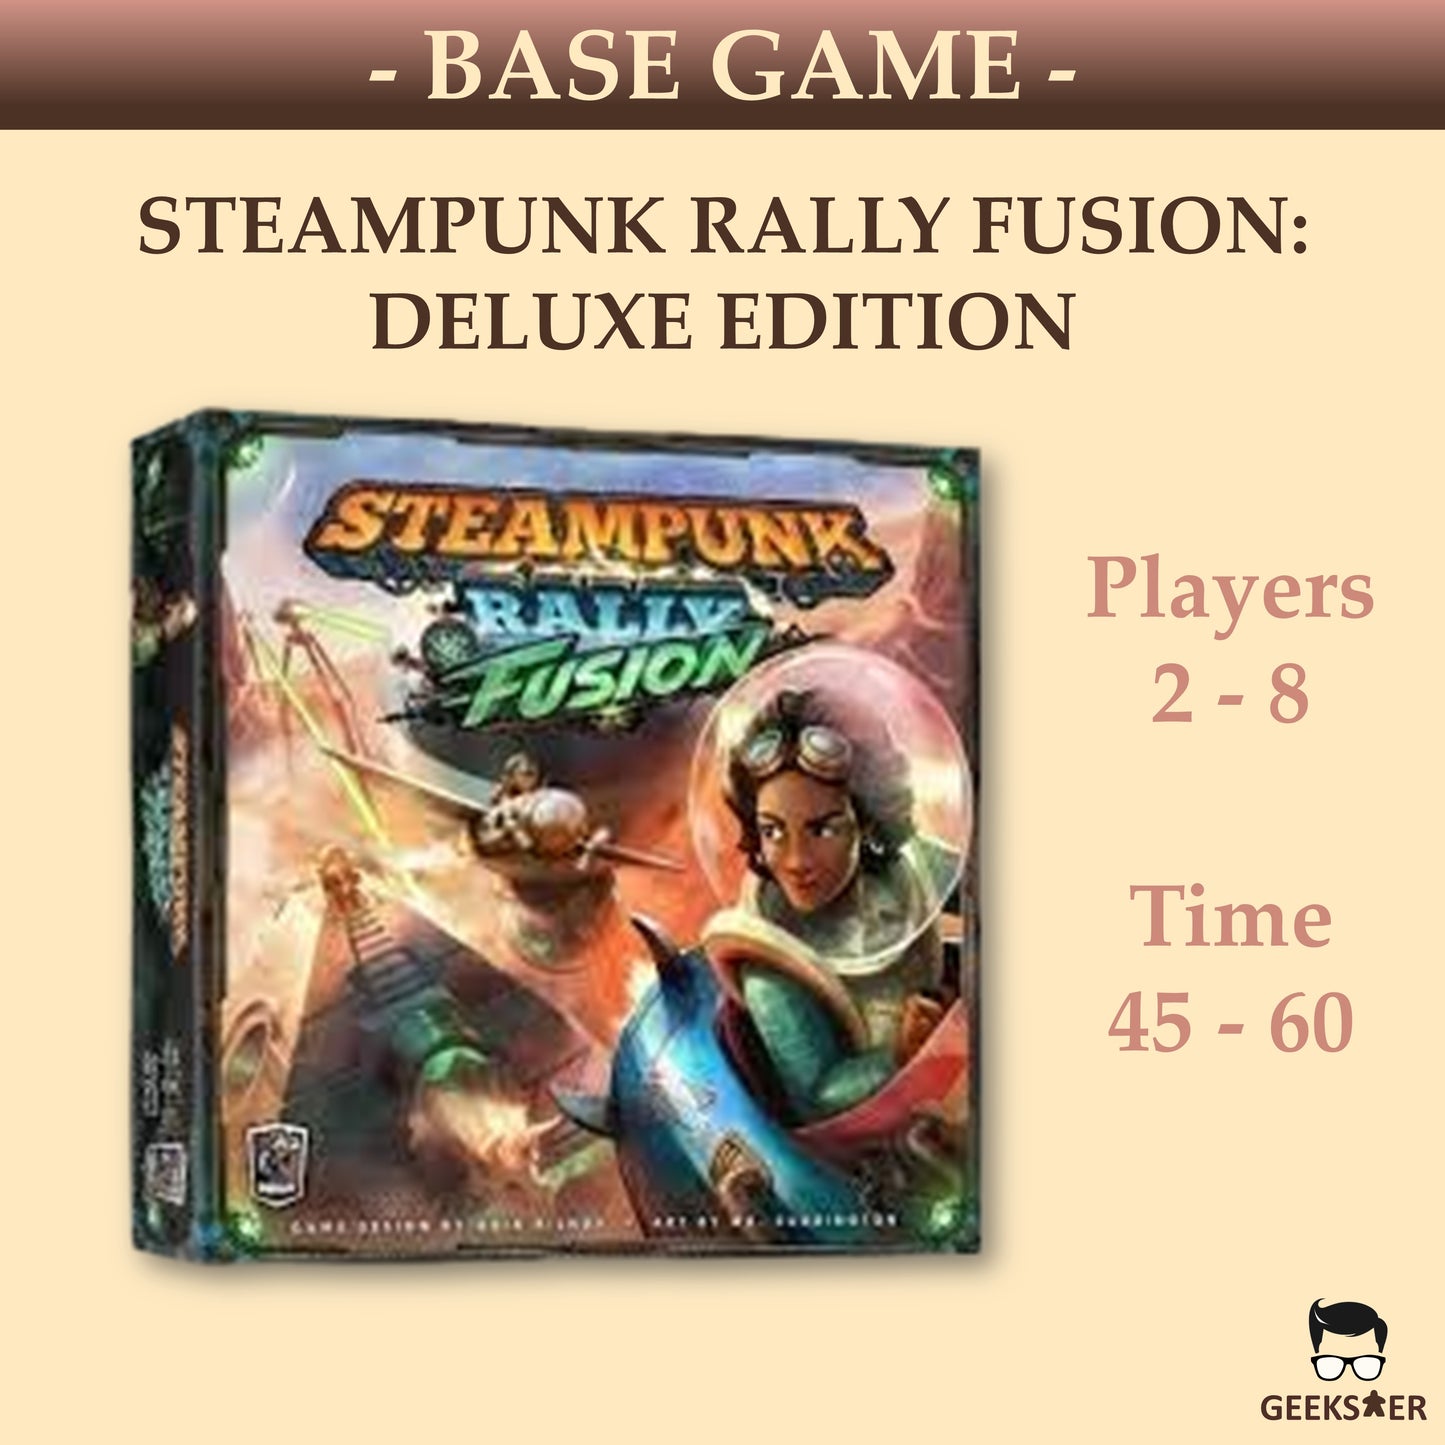 Steampunk Rally Fusion: Deluxe Edition